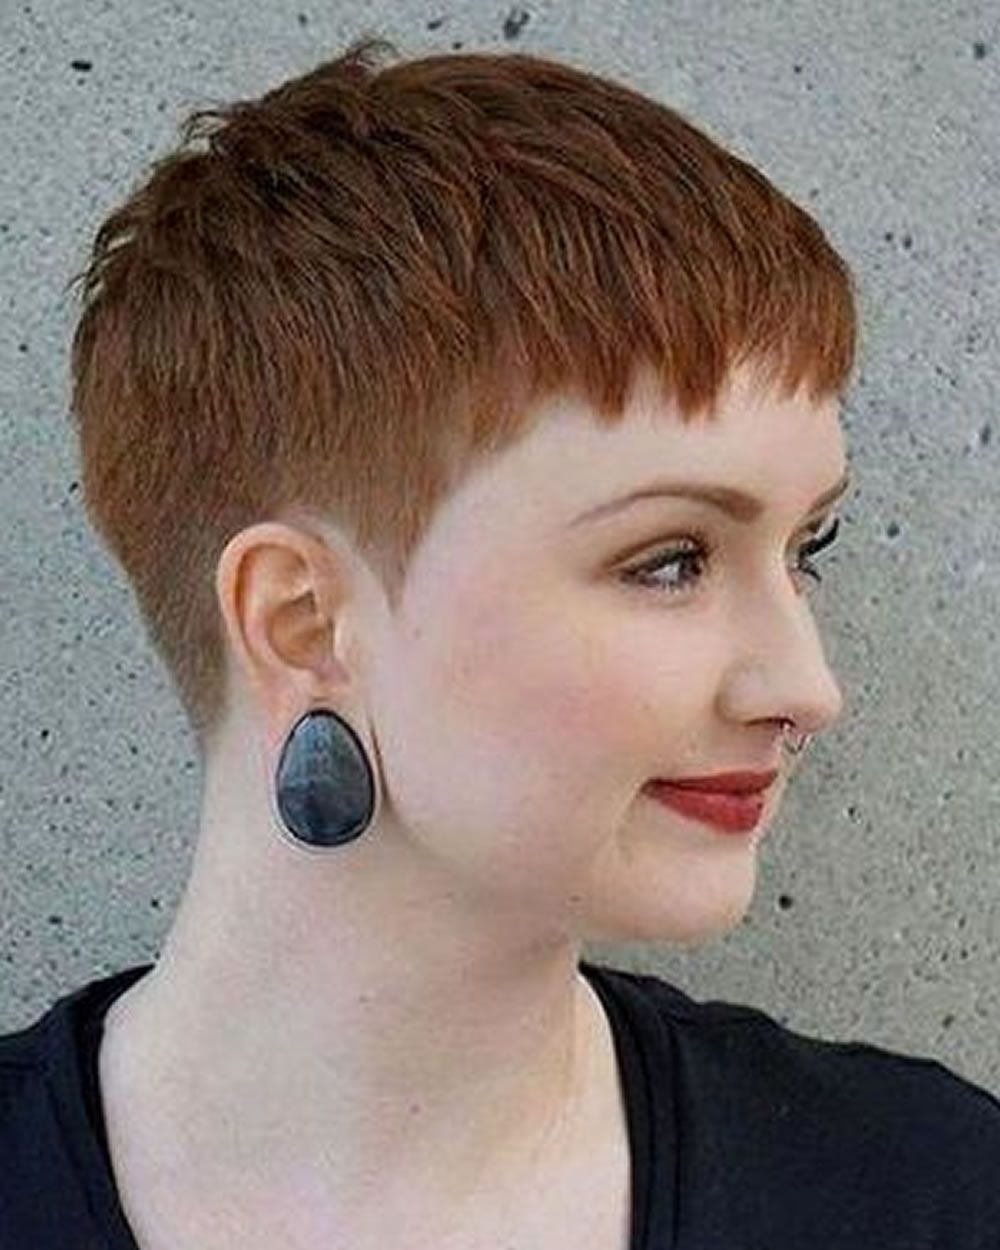 Hairstyles For Round Face And Thin Hair 2018 Throughout Most Current Short Pixie Hairstyles For Round Faces (View 6 of 15)